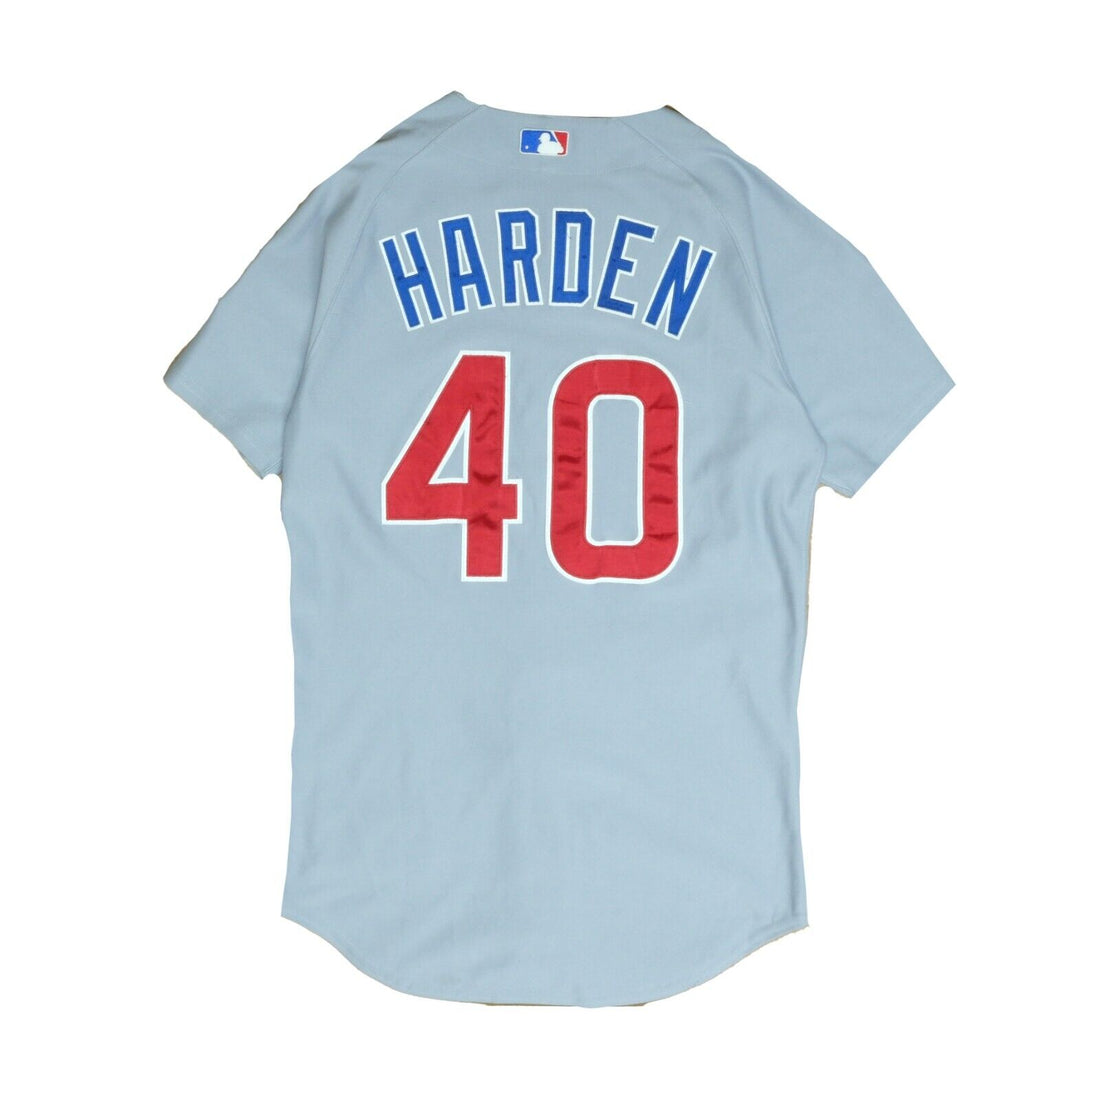 Chicago Cubs Rich Harden Authentic Majestic Baseball Jersey Size 40 MLB